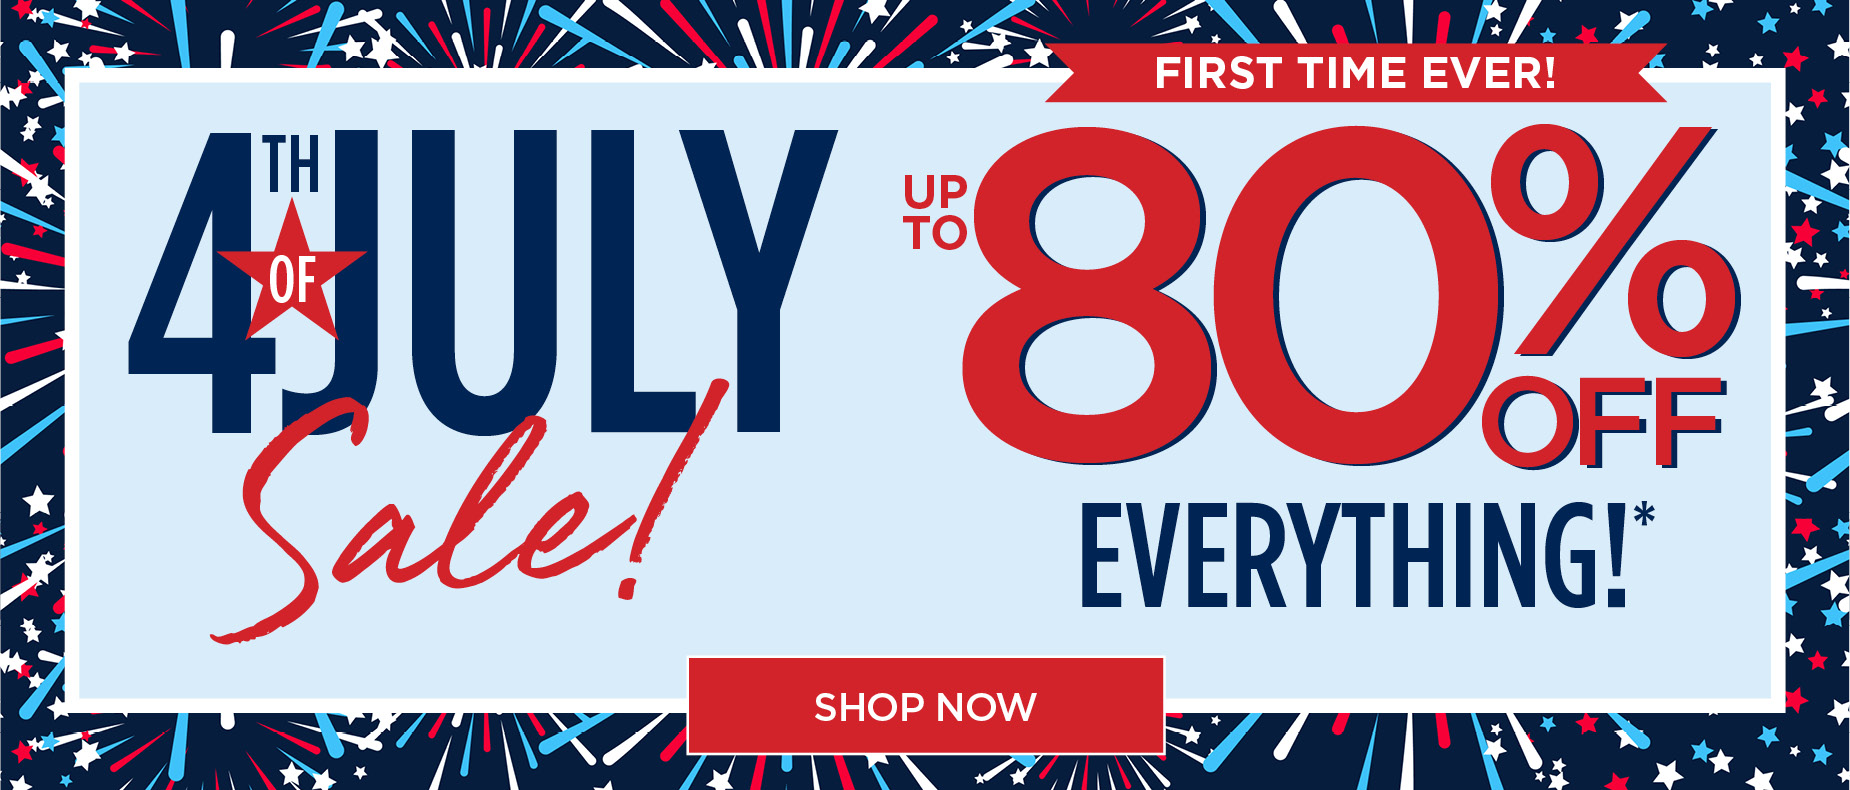 4th of july sale: first time ever - up to 80% off everything